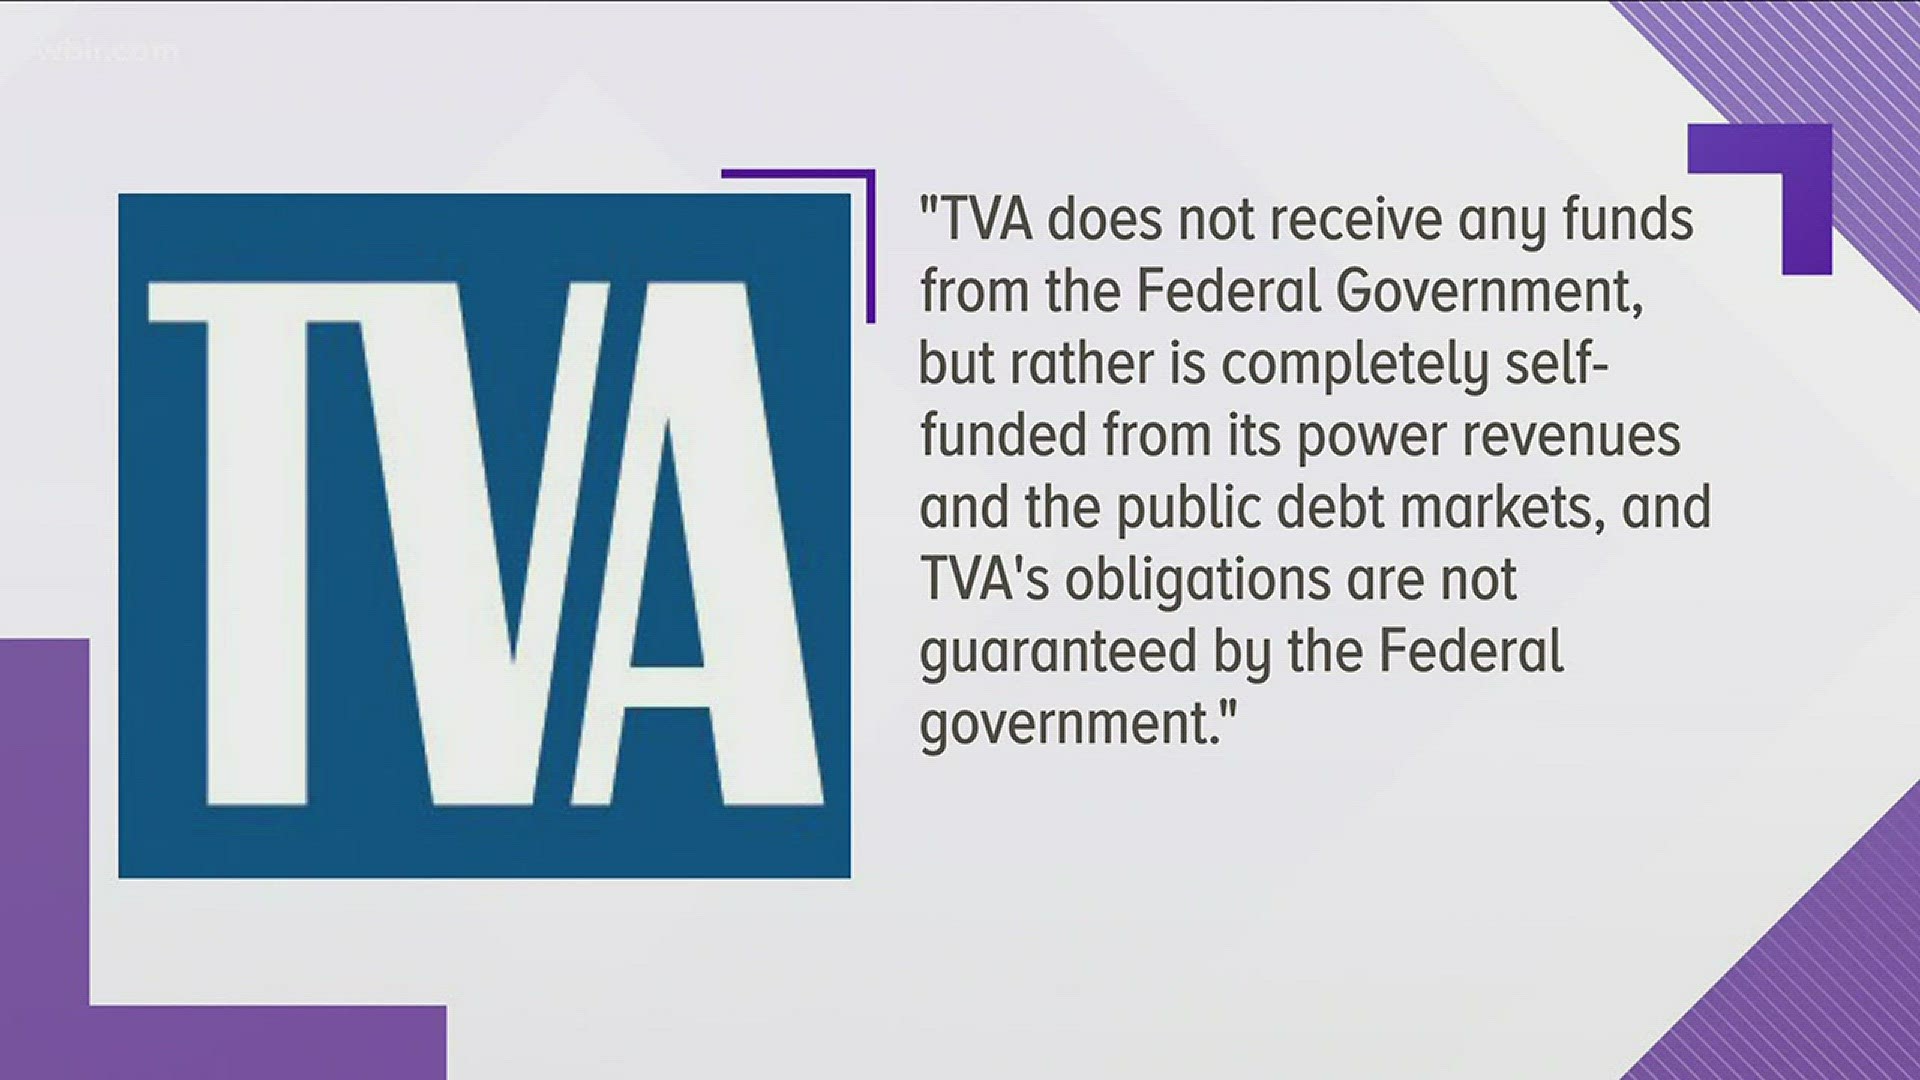 President Trump sent a proposal to Congress asking for infrastructural improvements. One of those being the sale of the TVA.